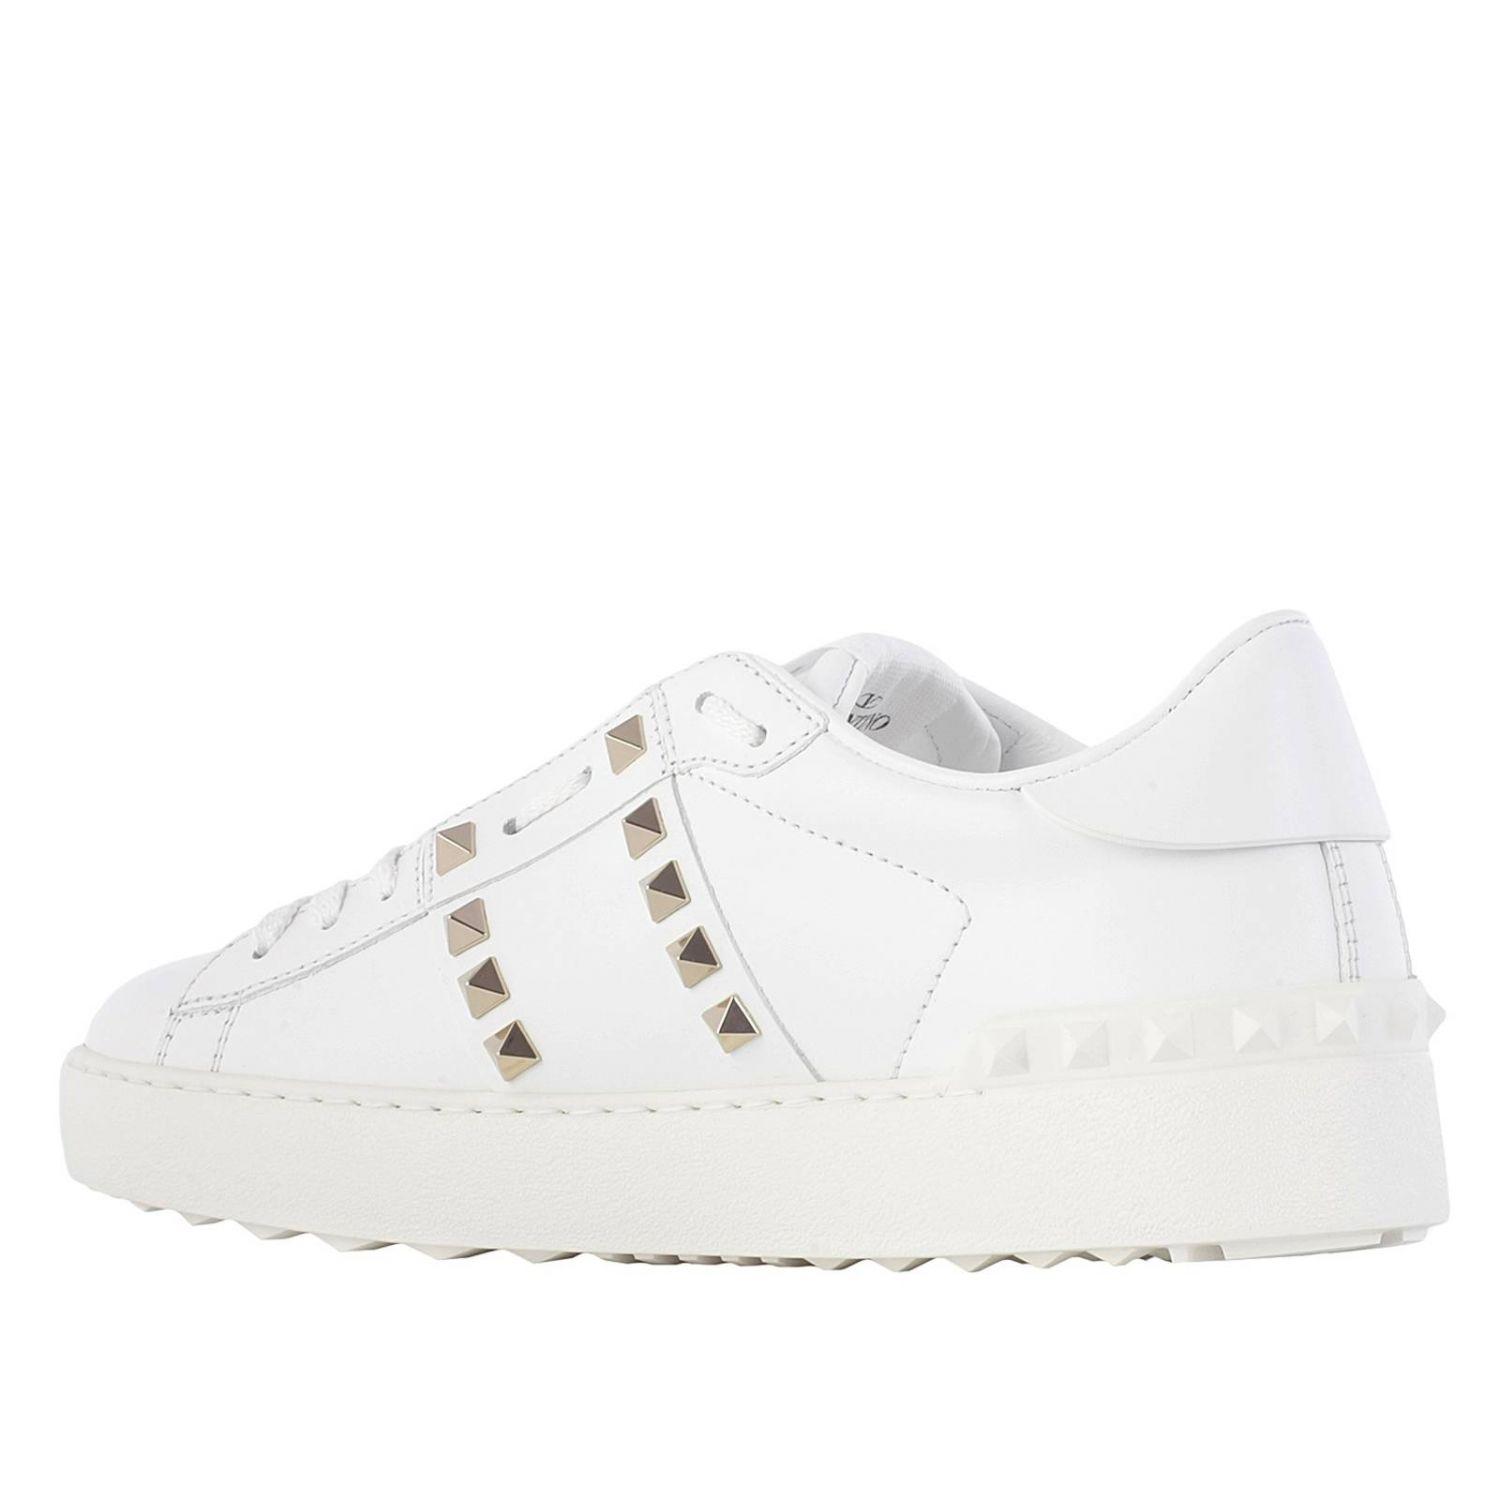 Valentino Tennis Stripe Stud Leather Trainers in White for